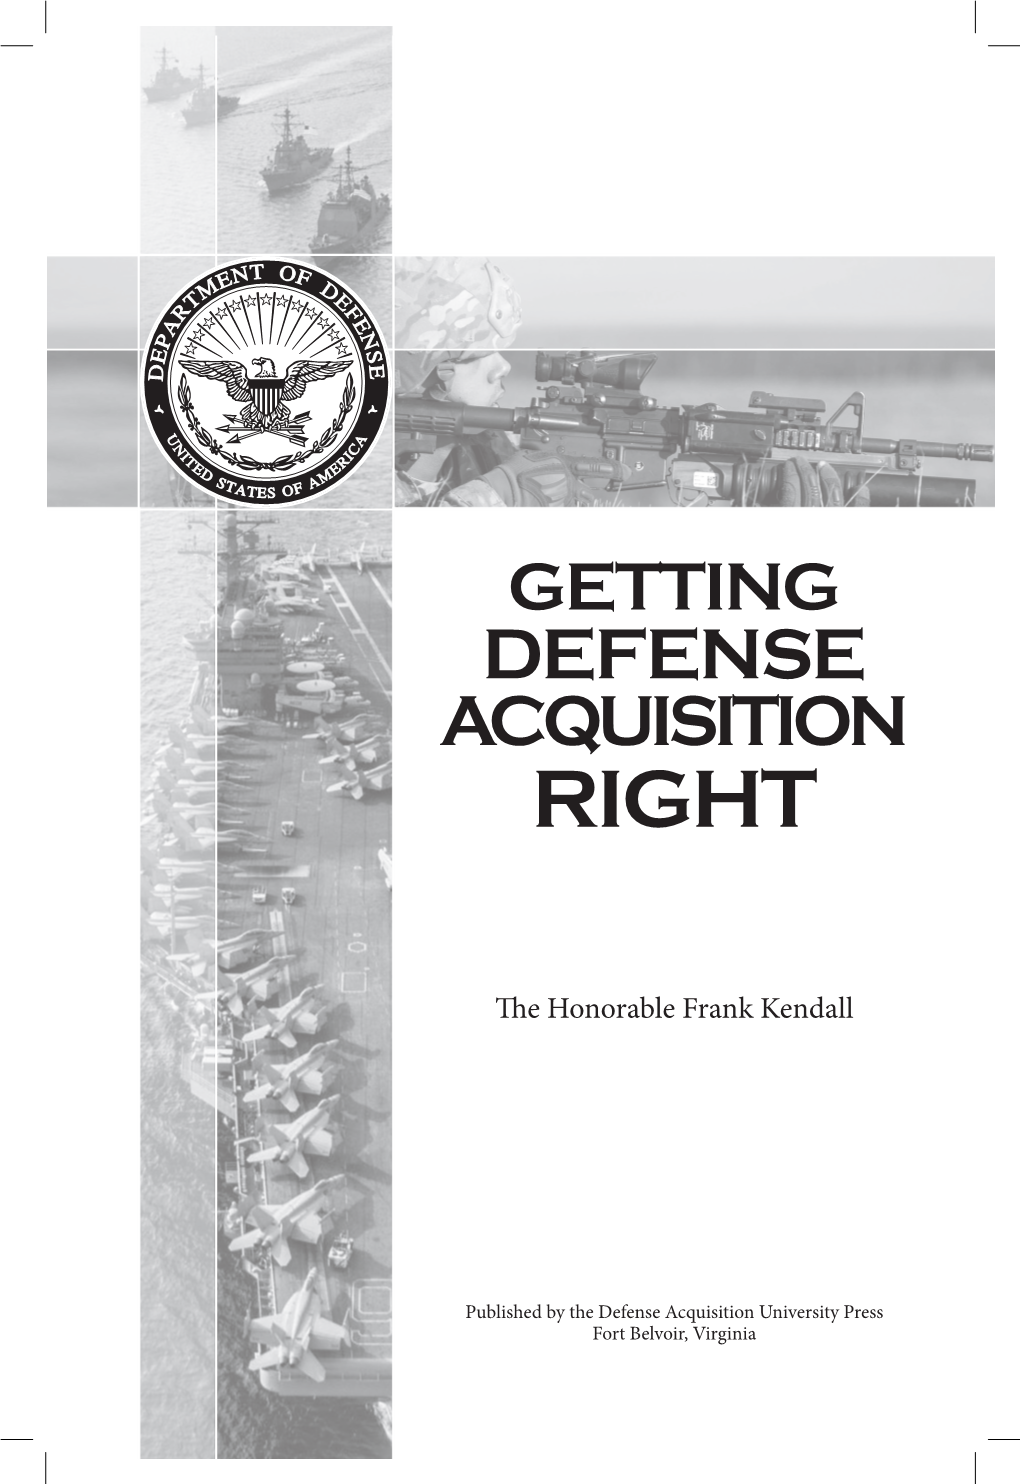 Getting Acquisition Right